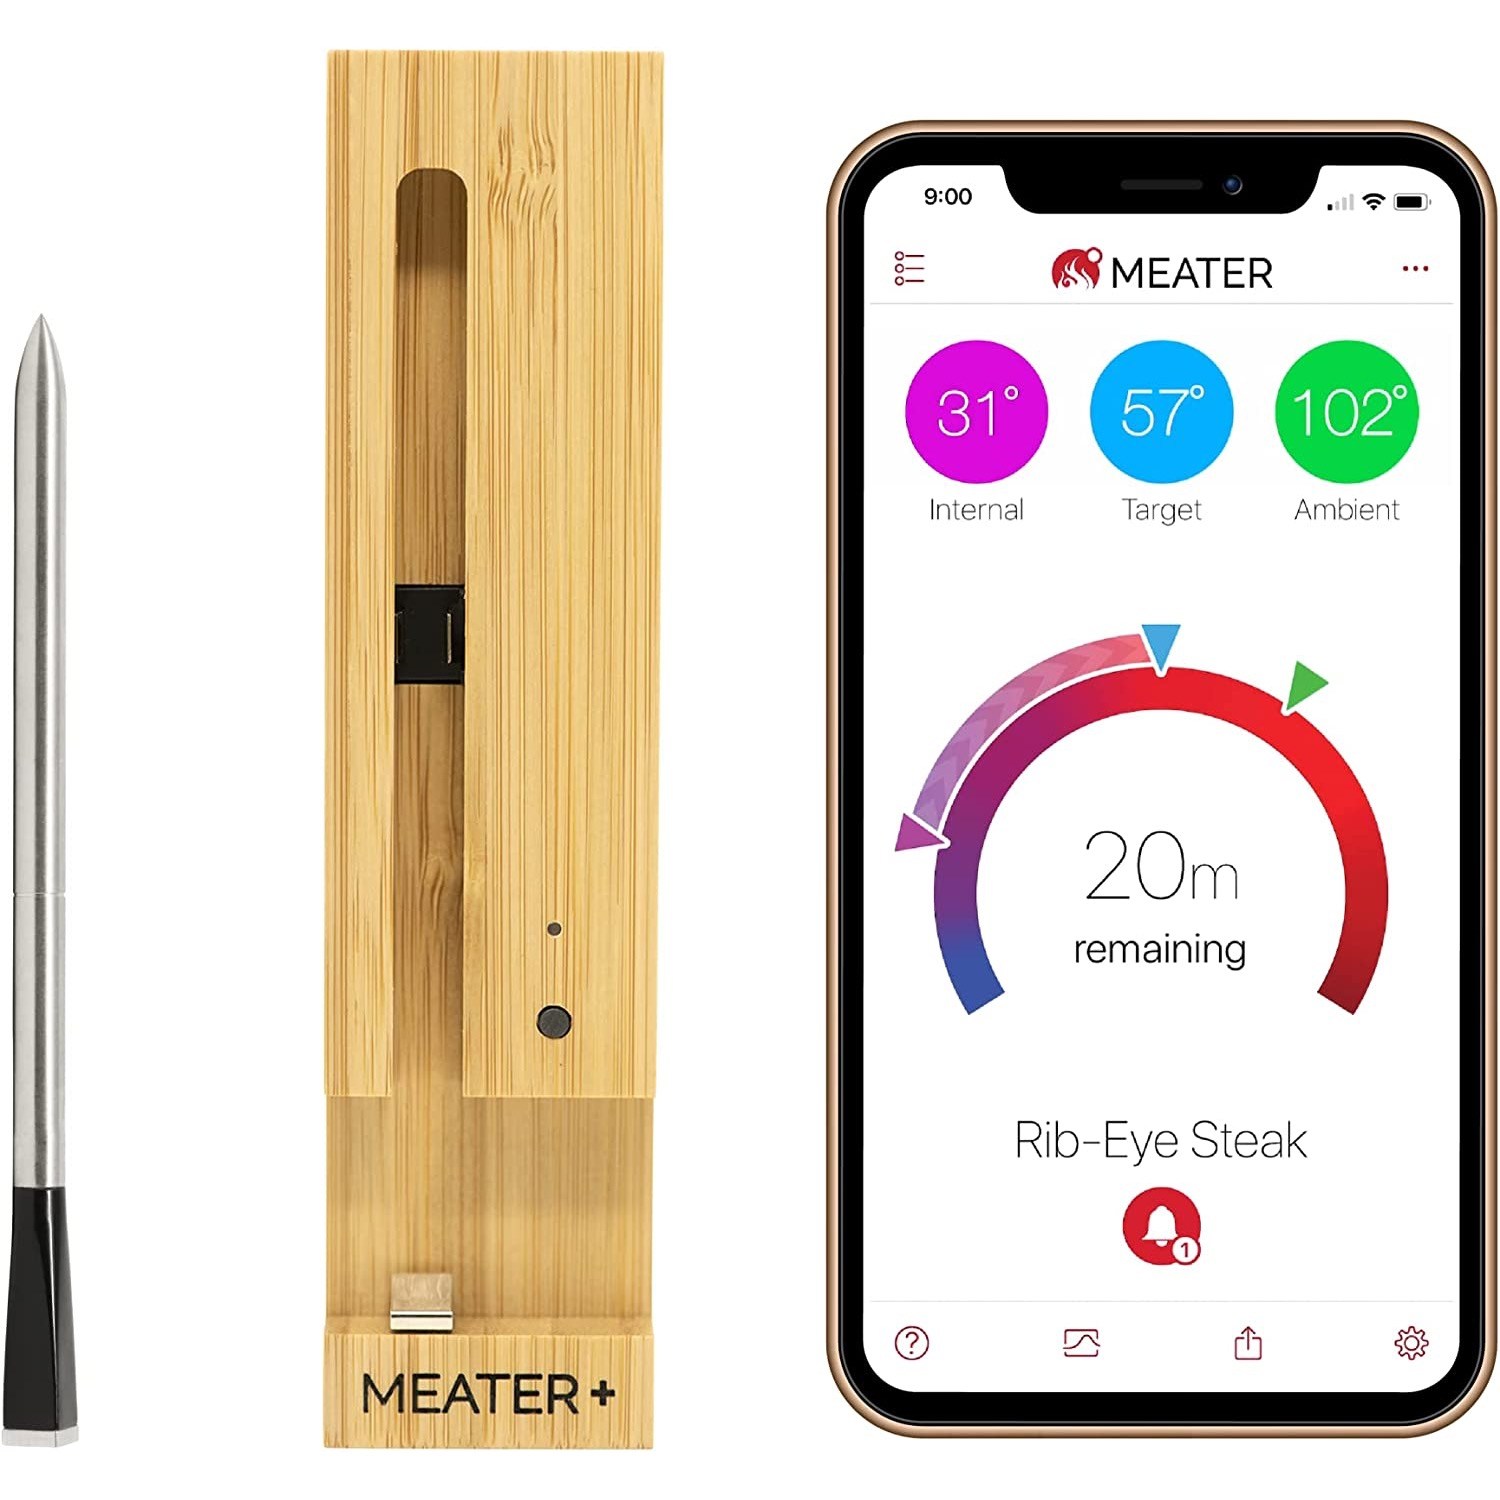 Yummly Premium Wireless Smart Meat Thermometer Cooks Meat Perfectly